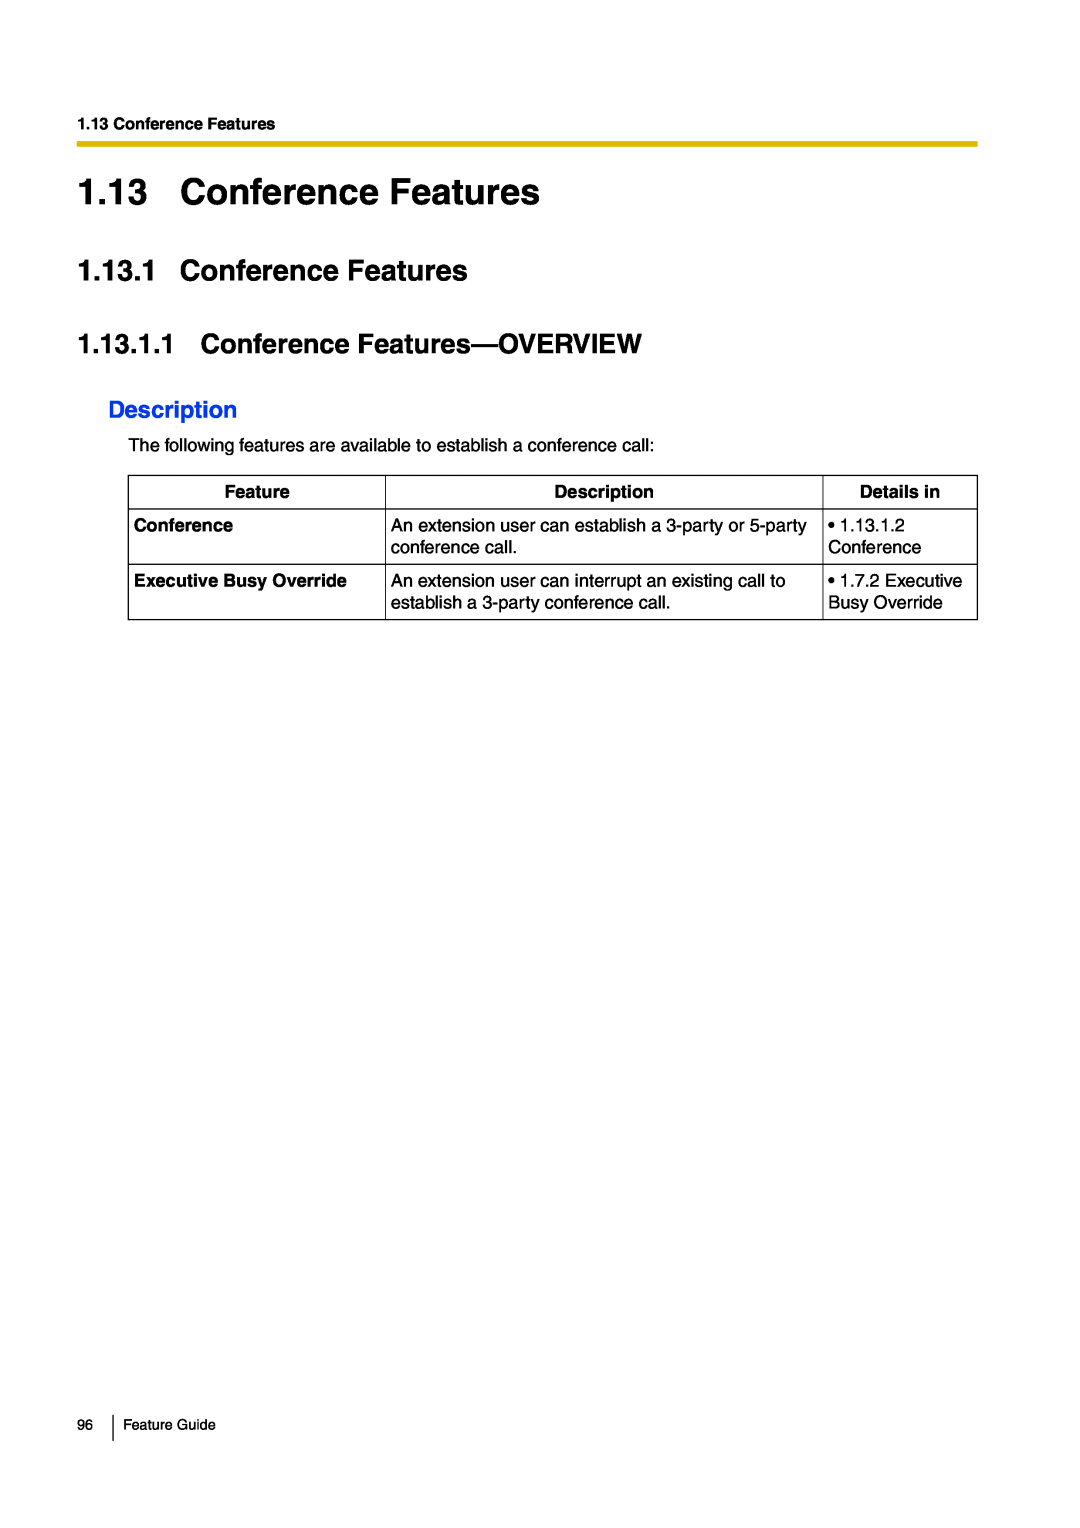 Panasonic kx-tea308 manual Conference Features—OVERVIEW, Description, Details in, Executive Busy Override 